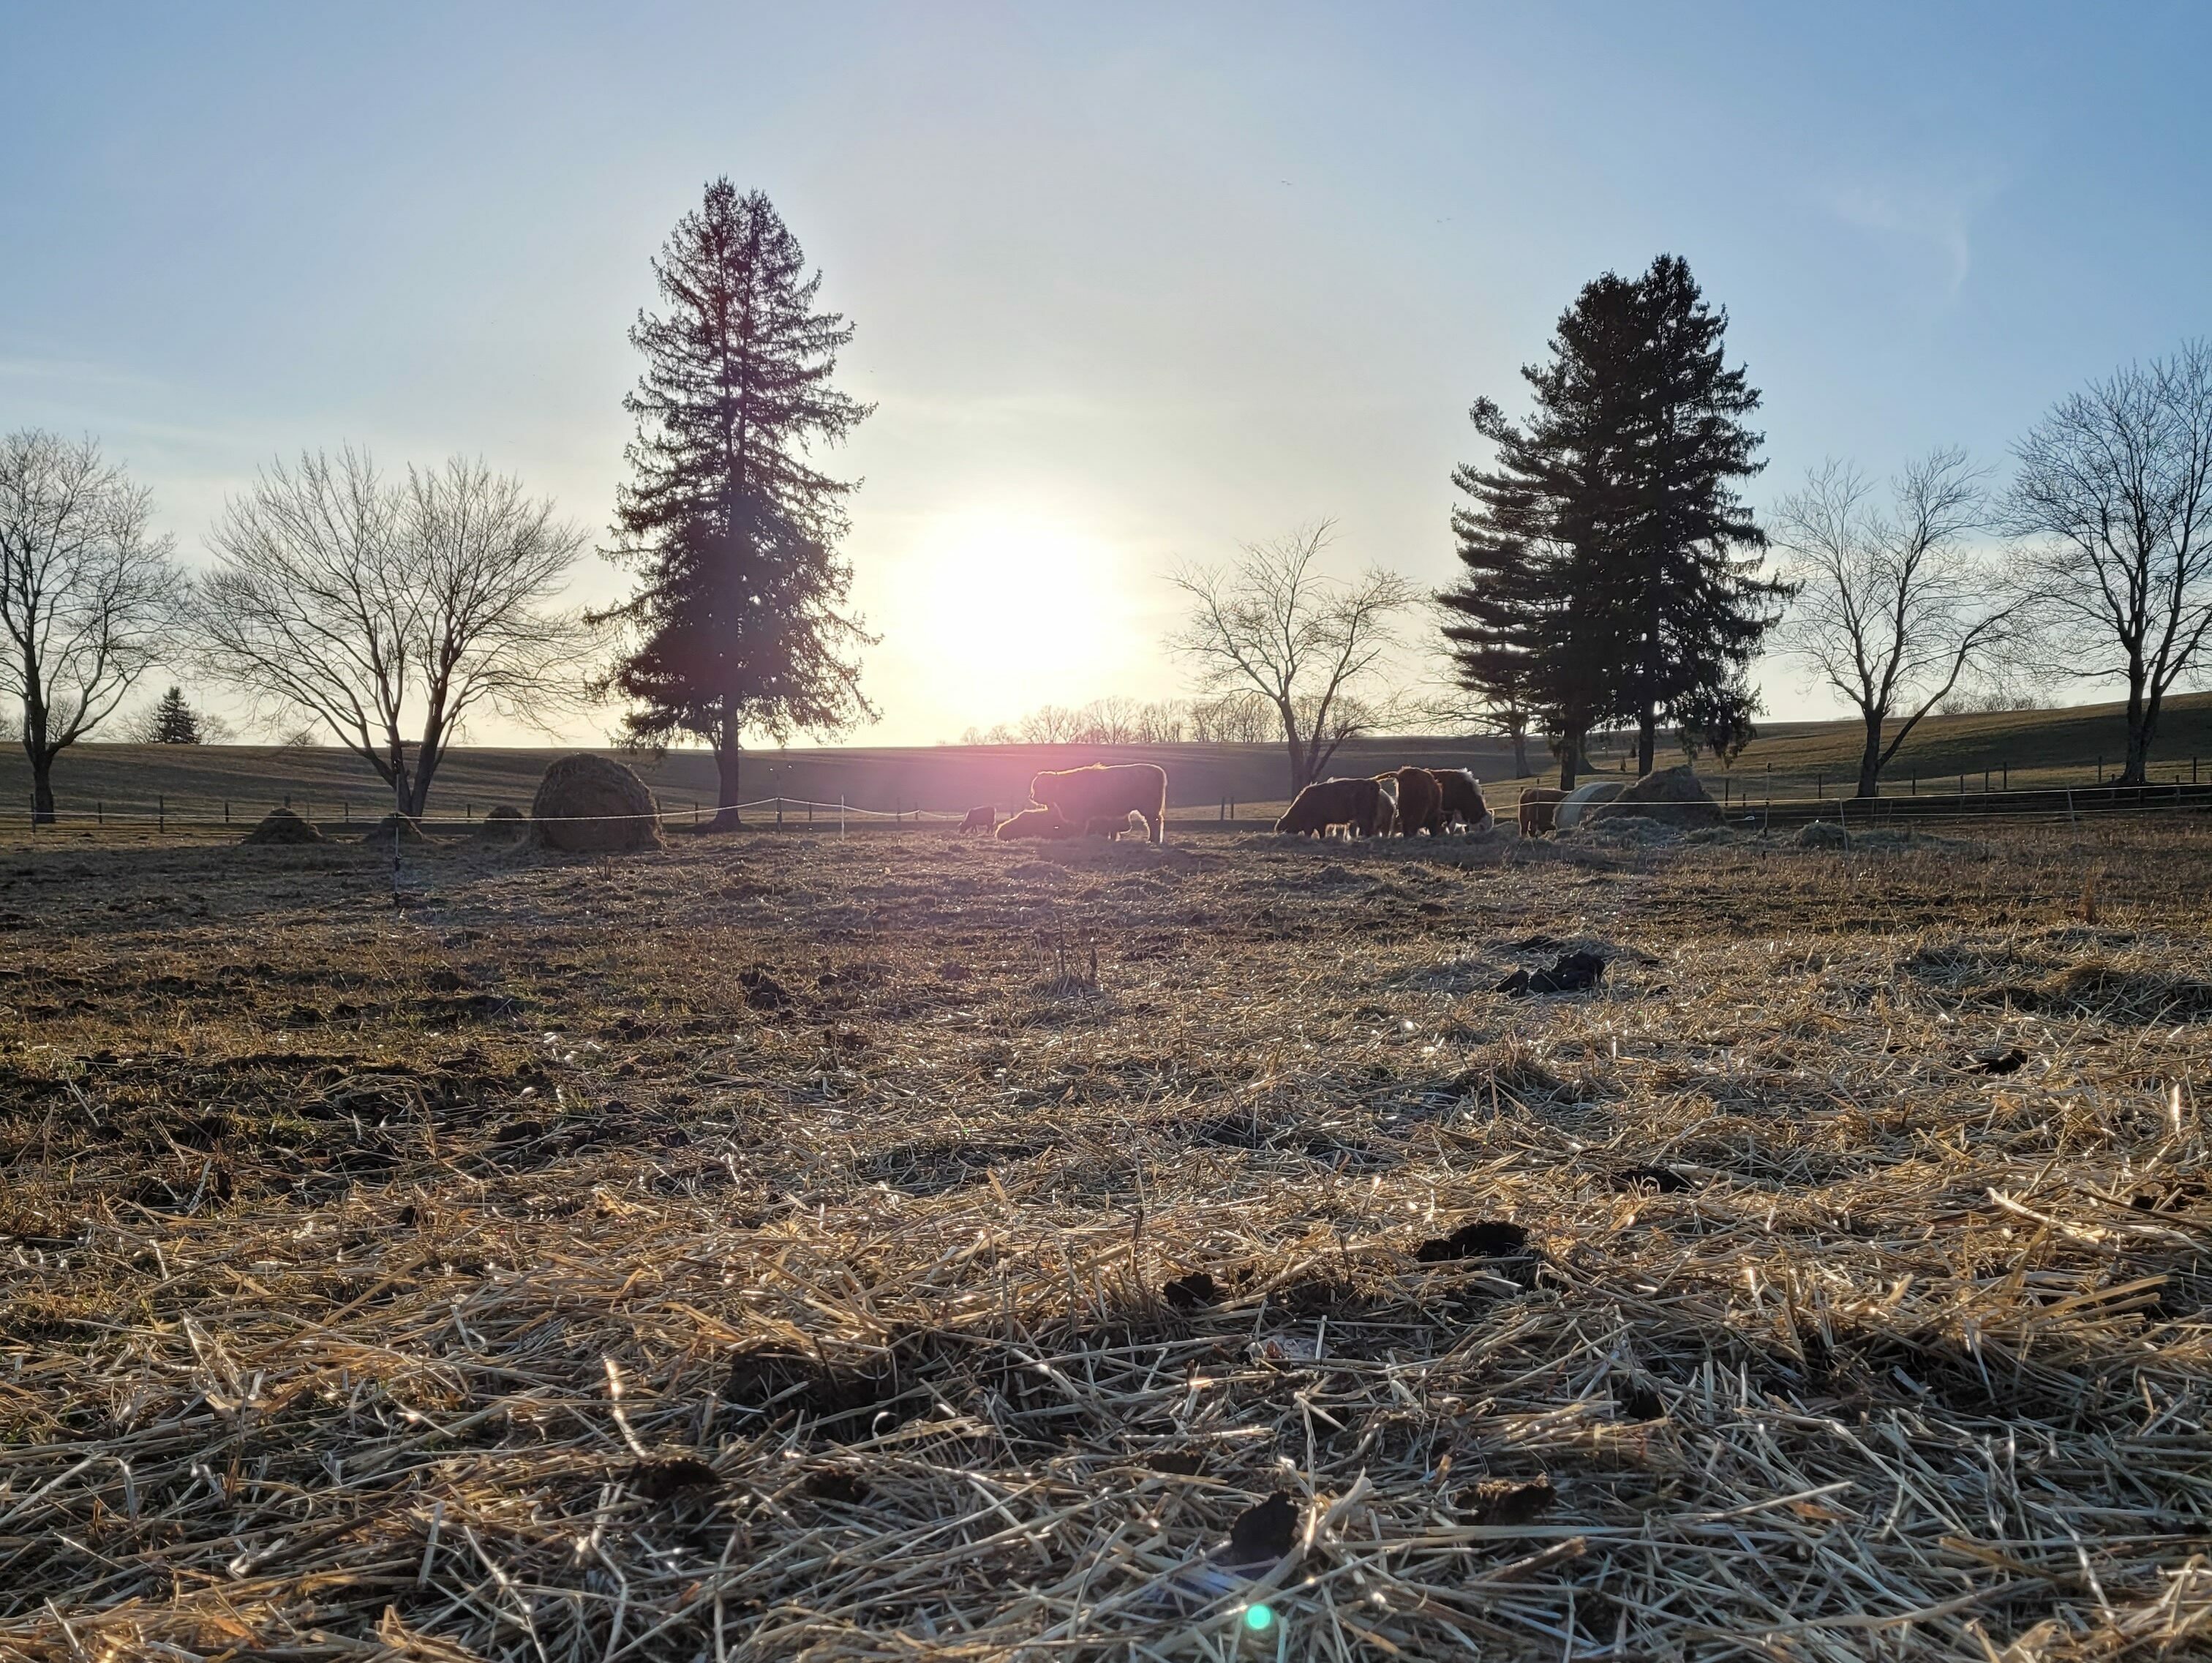 Hay litter and manure left behind after bale grazing. Monitor the thickness of litter to avoid dead spots during growing season.